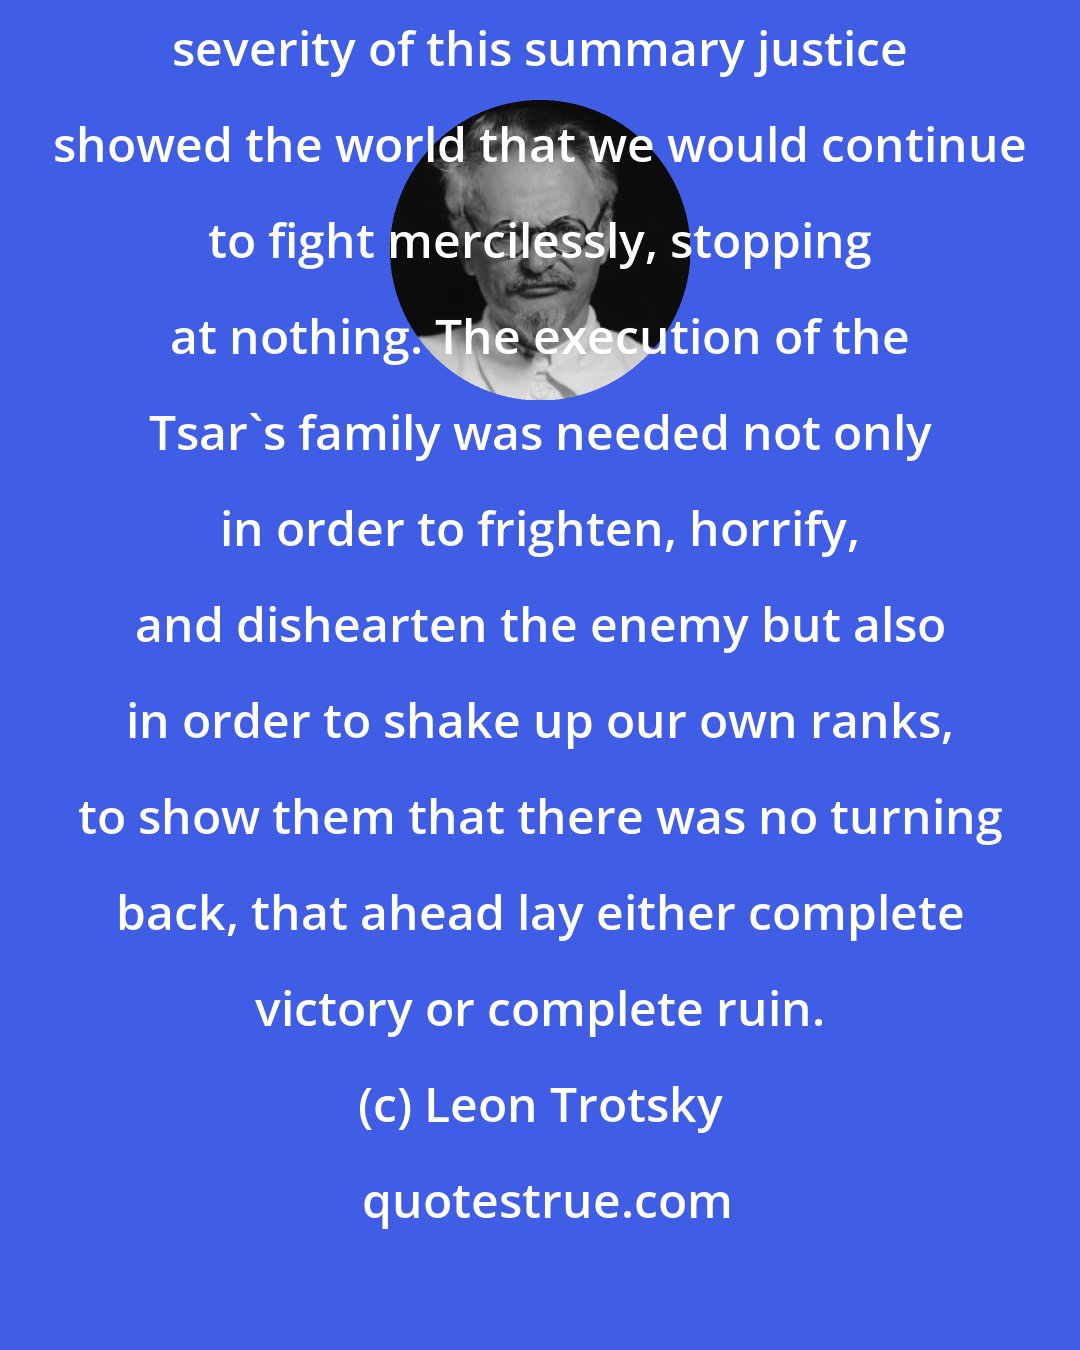 Leon Trotsky: Actually, the decision was not only expedient but necessary. The severity of this summary justice showed the world that we would continue to fight mercilessly, stopping at nothing. The execution of the Tsar's family was needed not only in order to frighten, horrify, and dishearten the enemy but also in order to shake up our own ranks, to show them that there was no turning back, that ahead lay either complete victory or complete ruin.